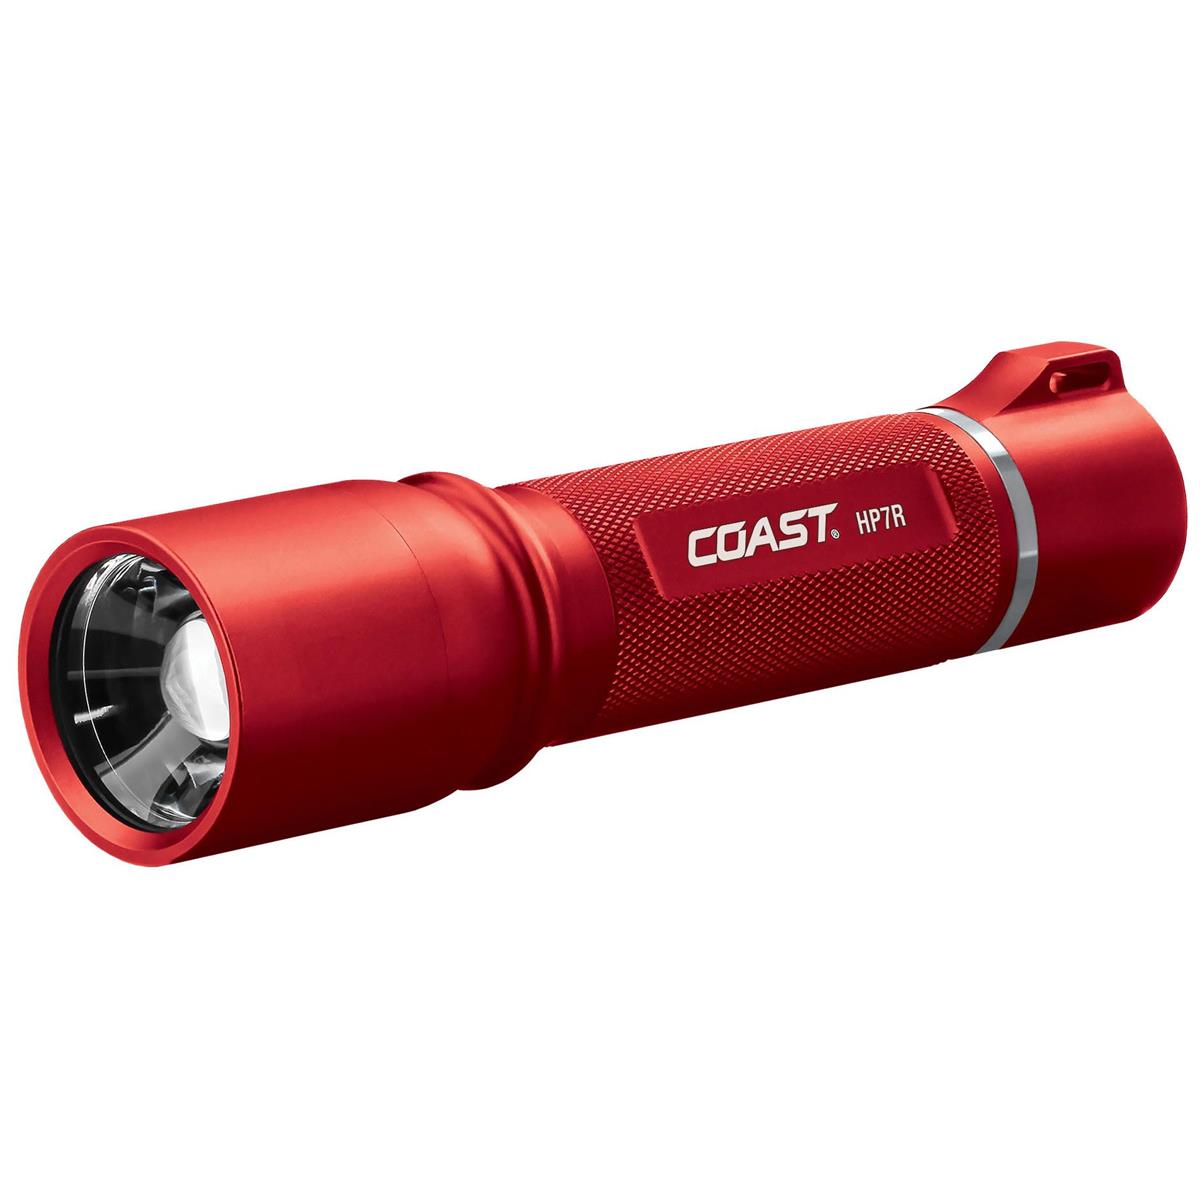 Coast HP7R Rechargeable Long Distance Focusing Flashlight, 300 Lumens, Red -  21526